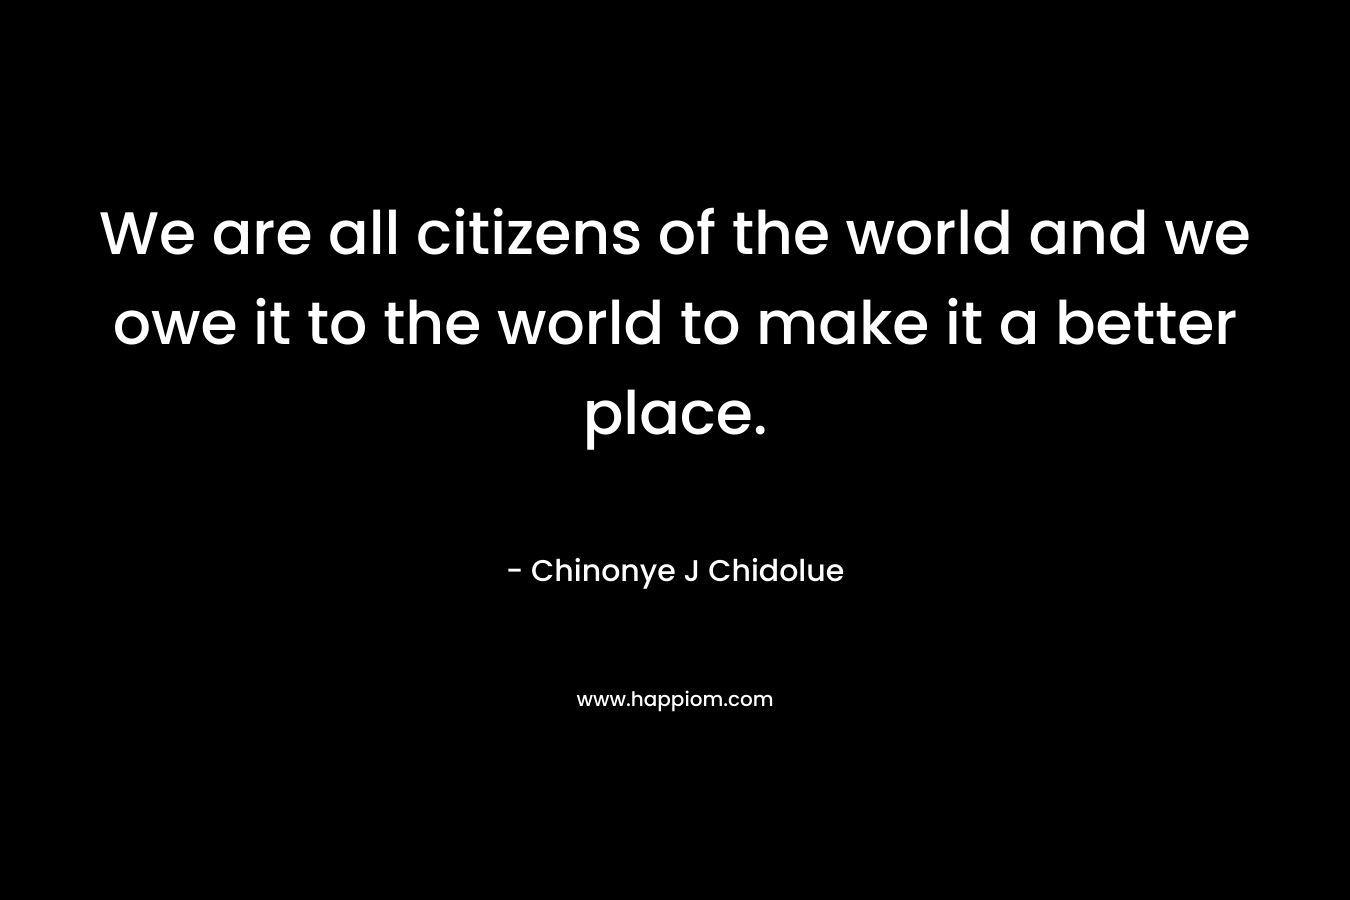 We are all citizens of the world and we owe it to the world to make it a better place.